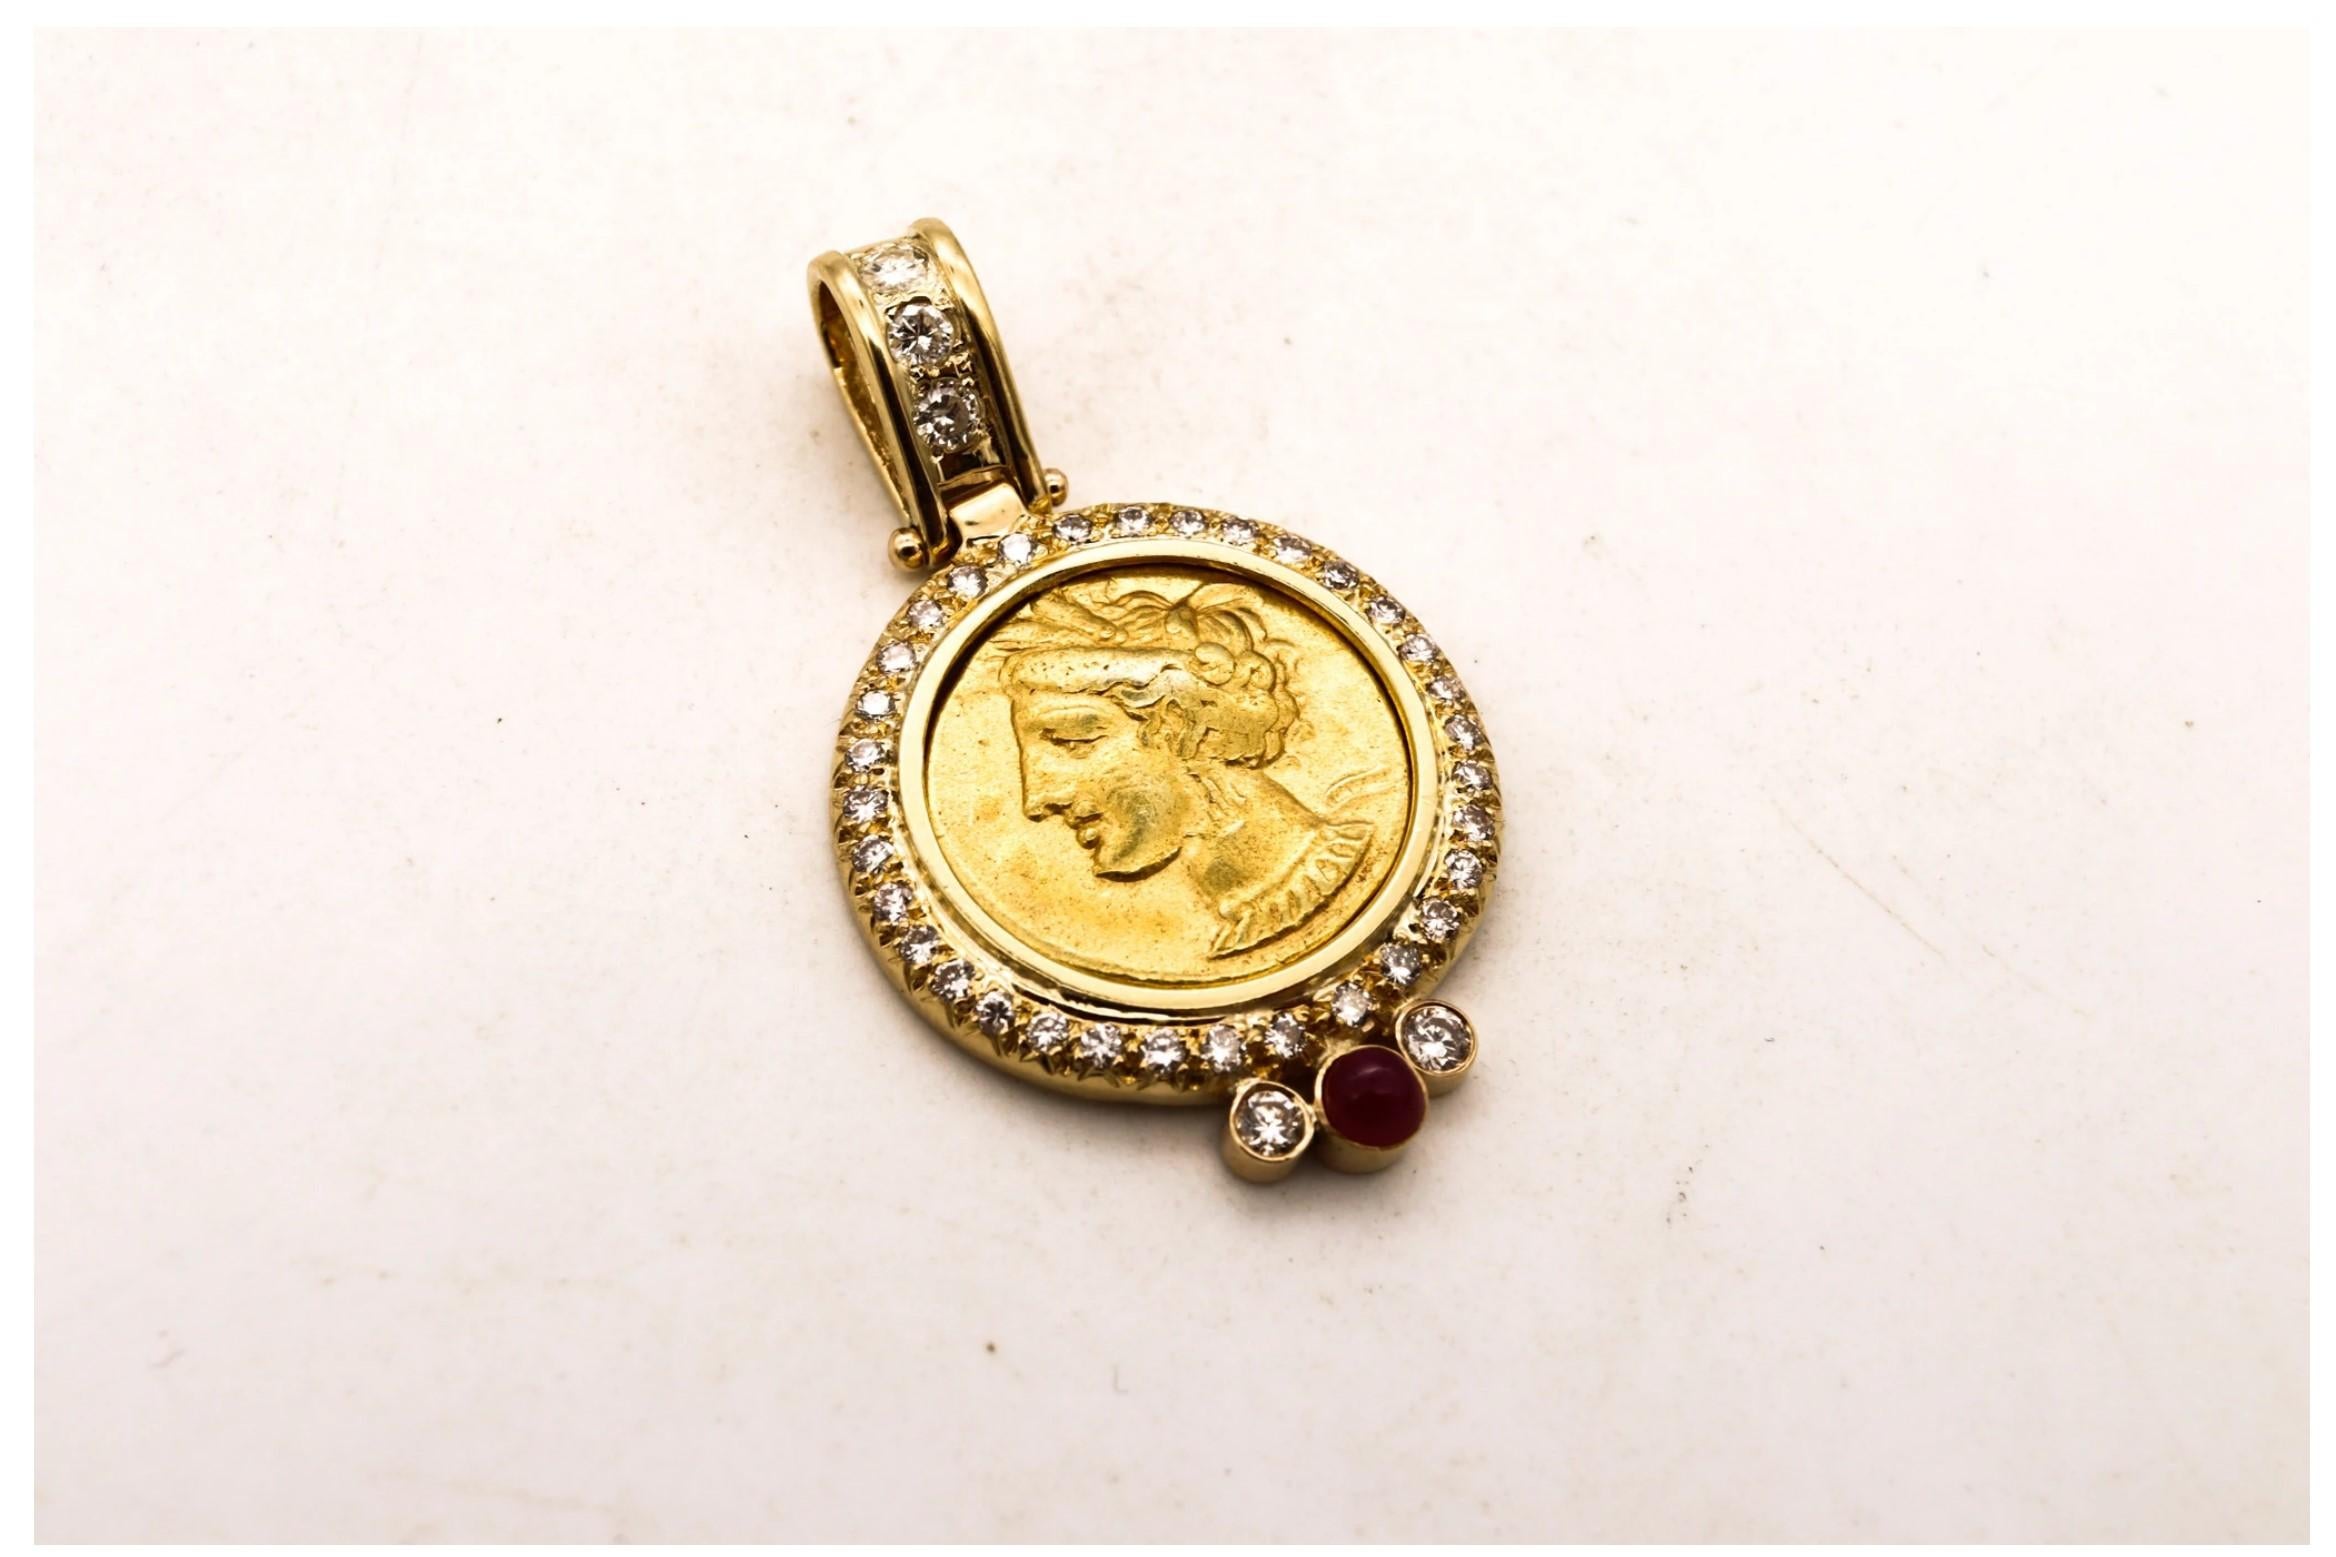 Brilliant Cut Ancient Carthage Punic Gold Electrum Stater Coin 320 BC 18Kt Gold Diamonds Ruby